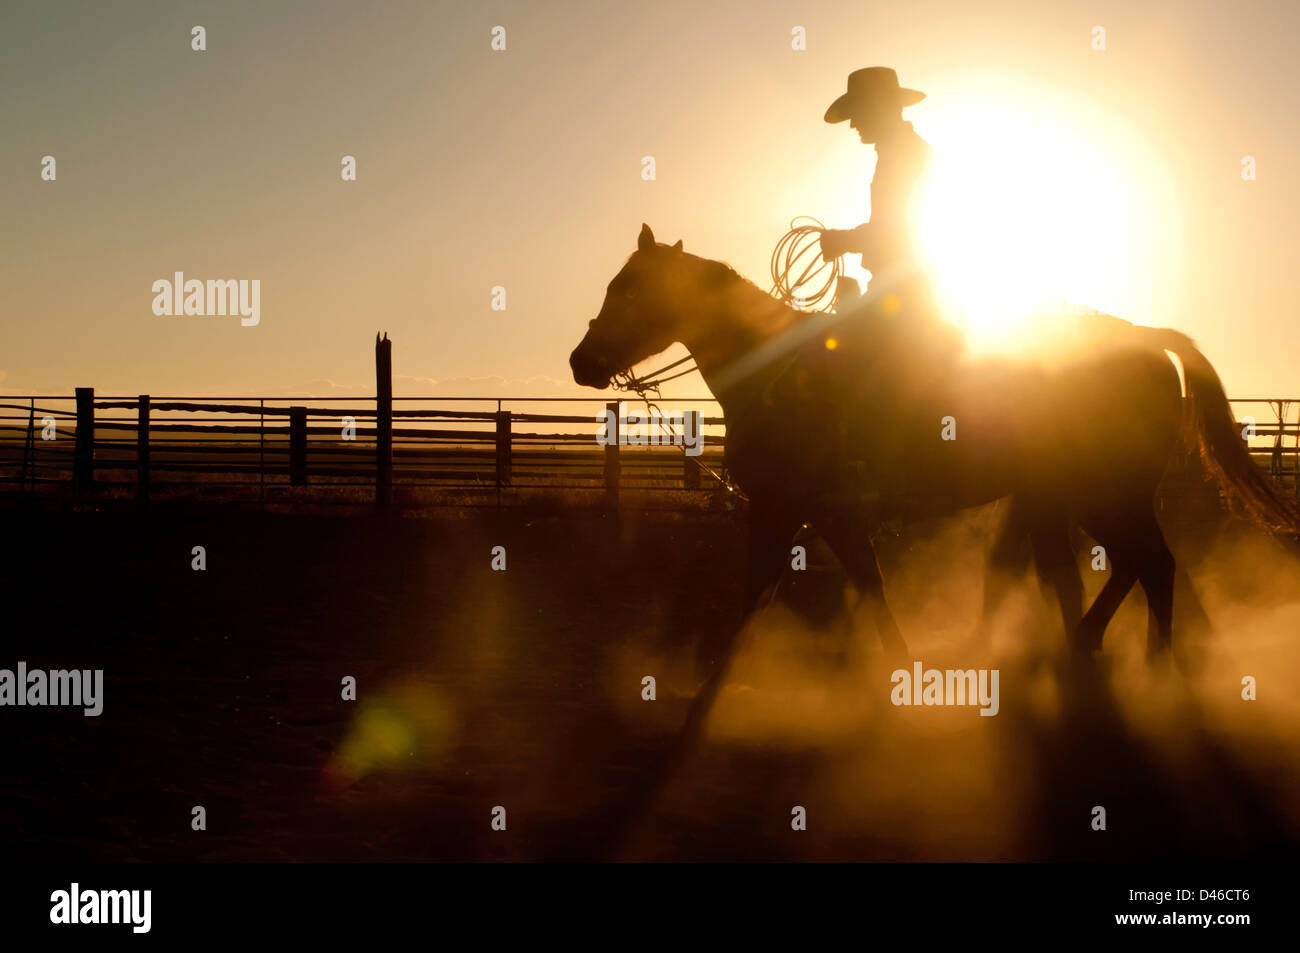 Cowboy with a rope silhouetted while riding horse at sunset. Twin Falls, Idaho. Stock Photo